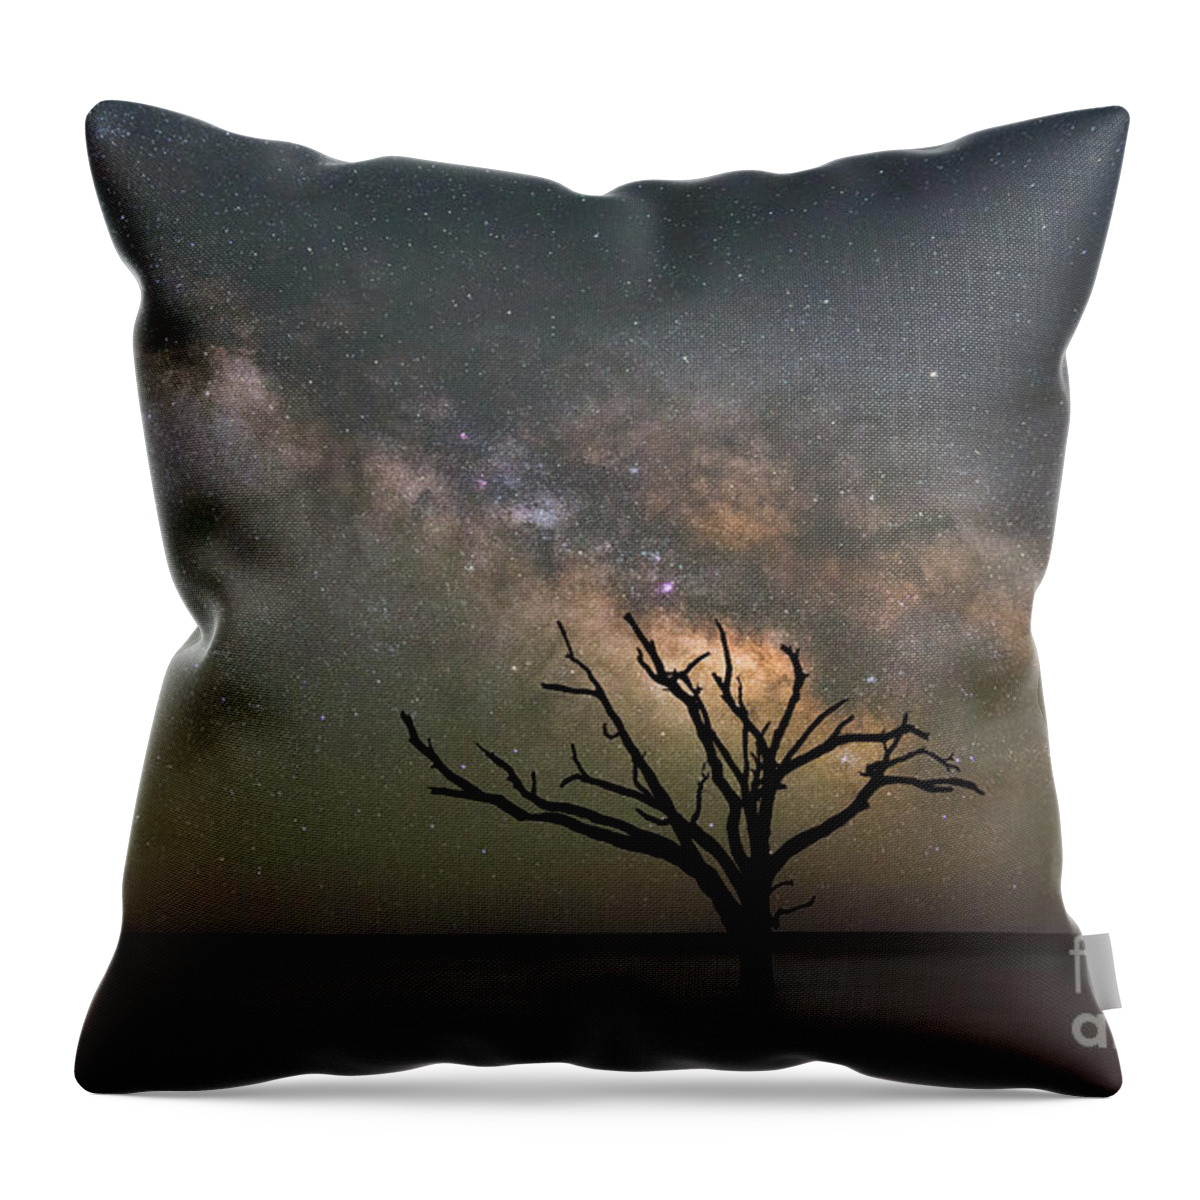 Botany Bay Milky Way Throw Pillow featuring the photograph The Dead Forest Milky Way 2x3 Ratio by Michael Ver Sprill